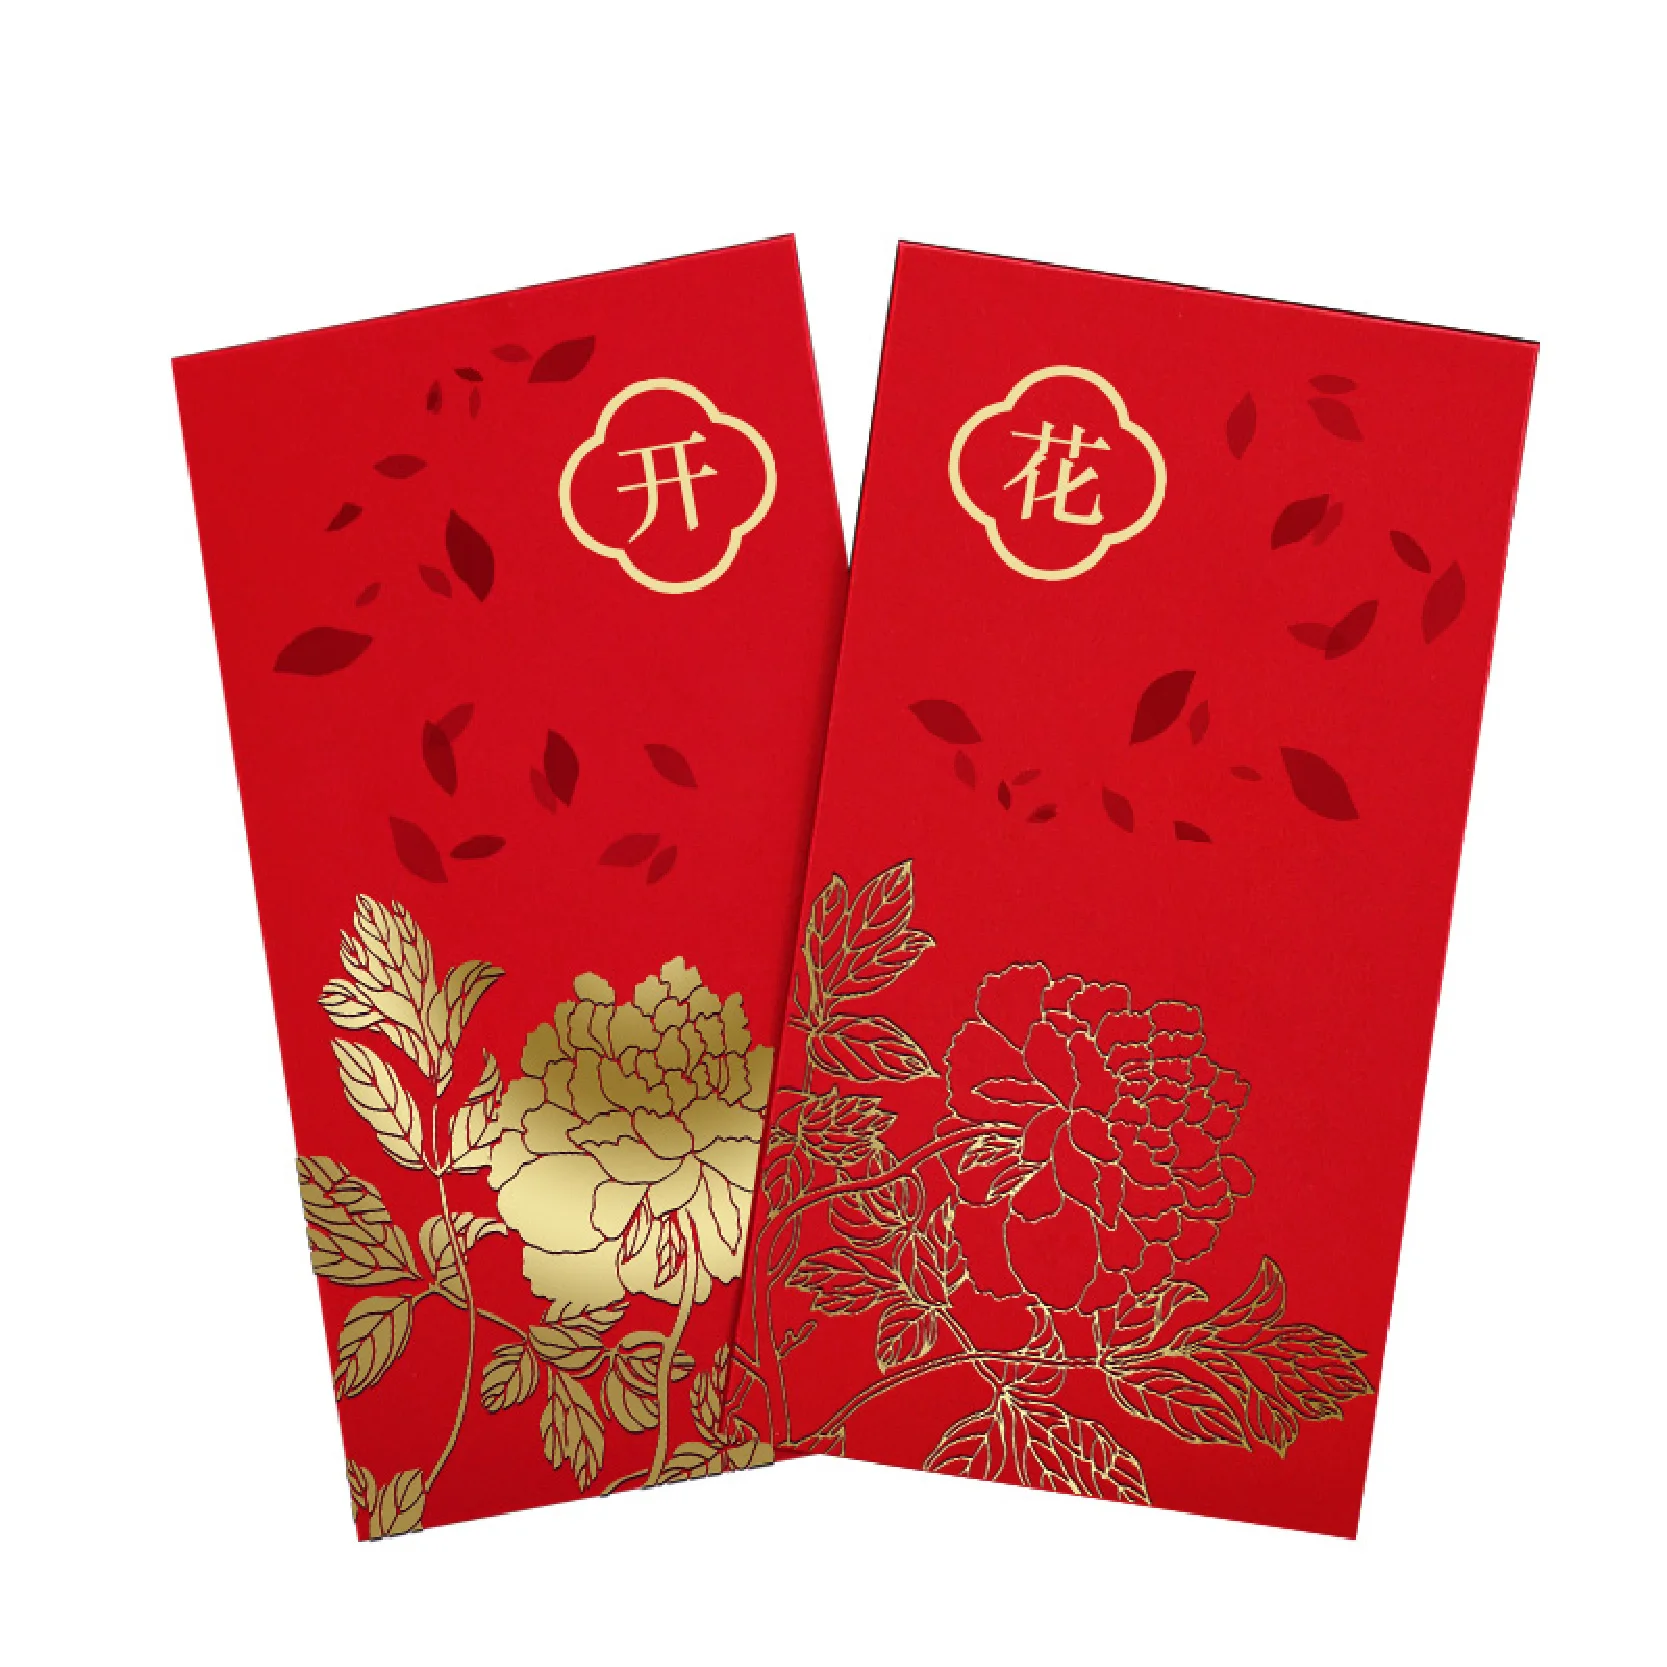 46 Red Packet Designs ideas  red packet, red pocket, red envelope